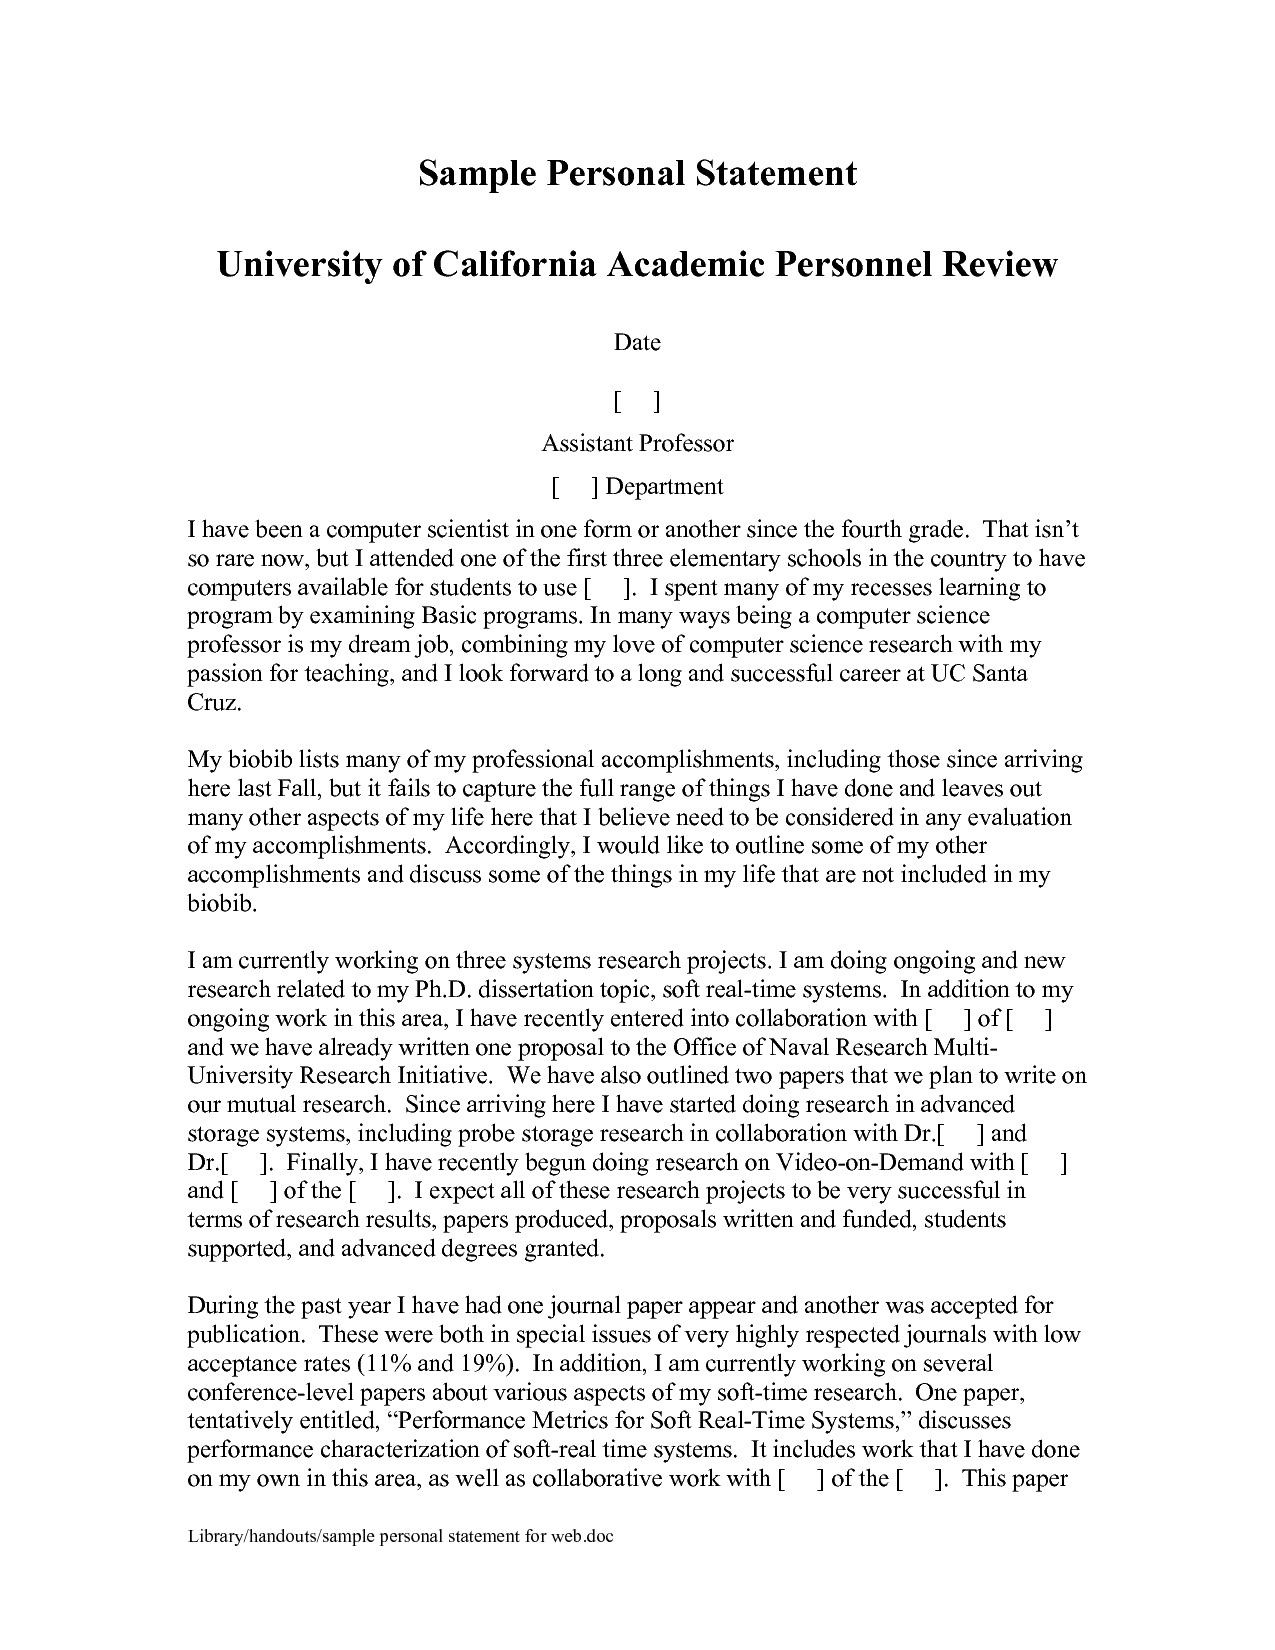 personal statement for graduate school sample   Physic 